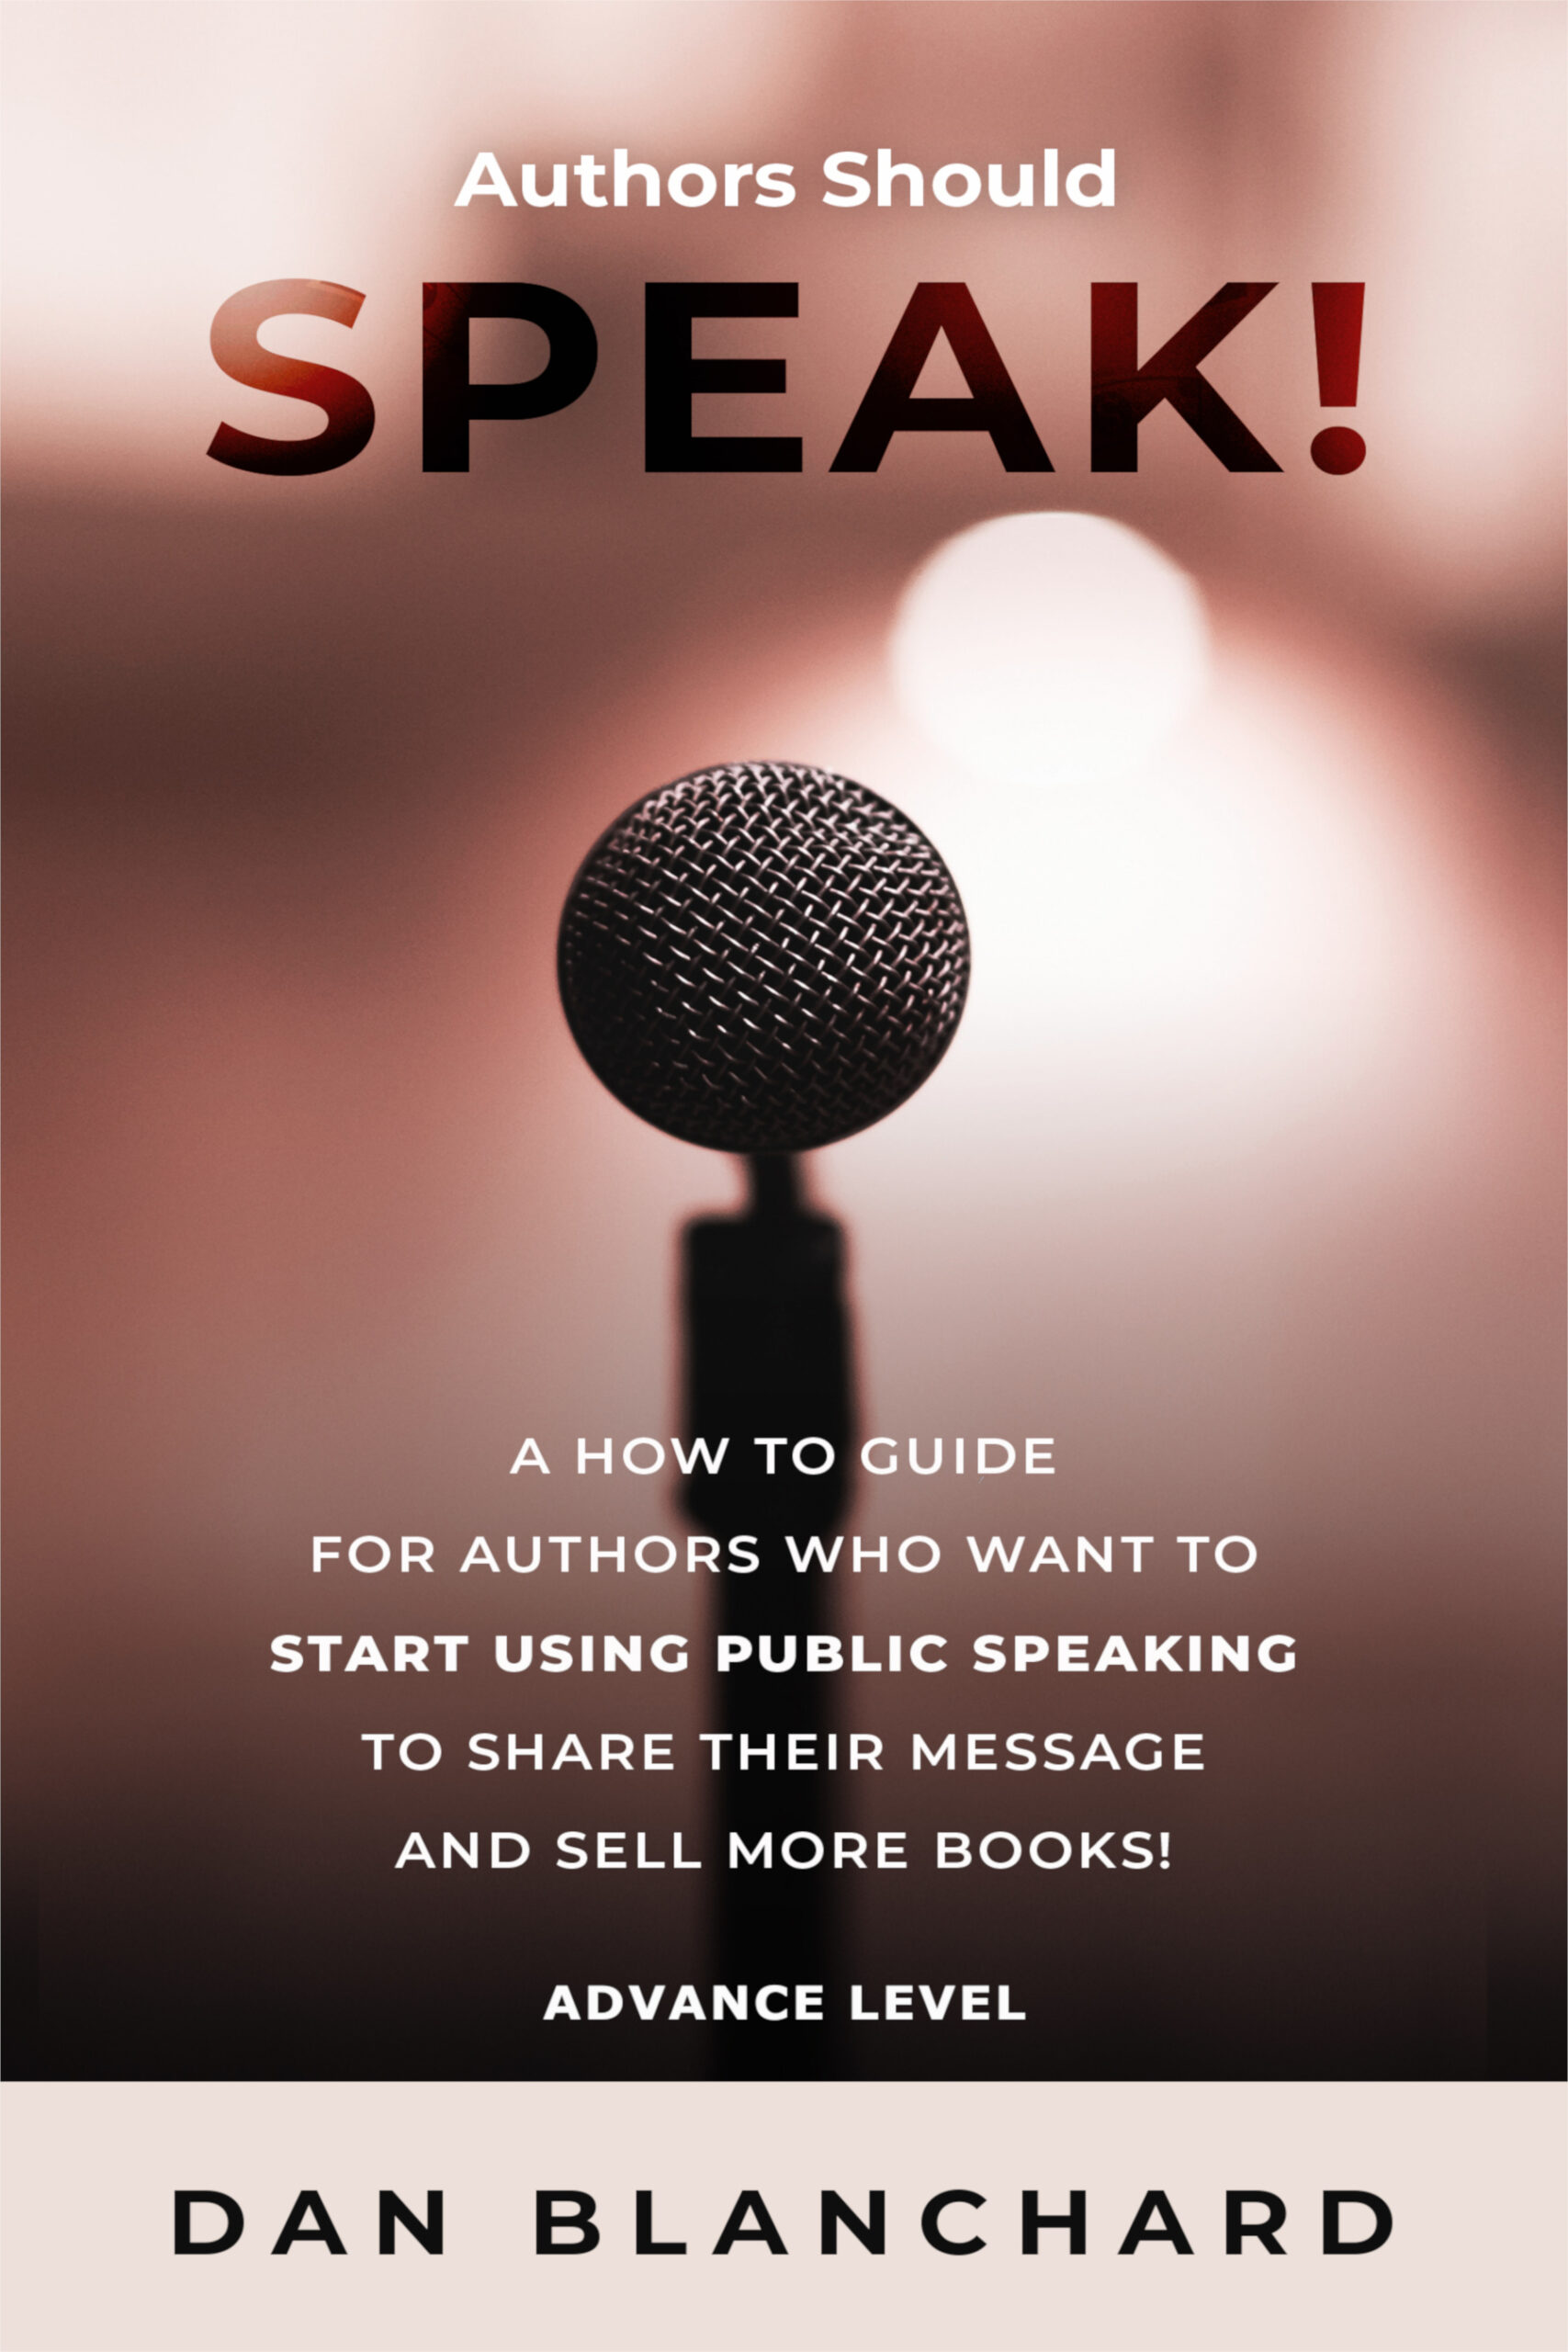 FREE: Authors Should Speak Advance Level: How Authors Can Share Their Message and Push Book Sales to the Next Level through Speaking by Dan Blanchard